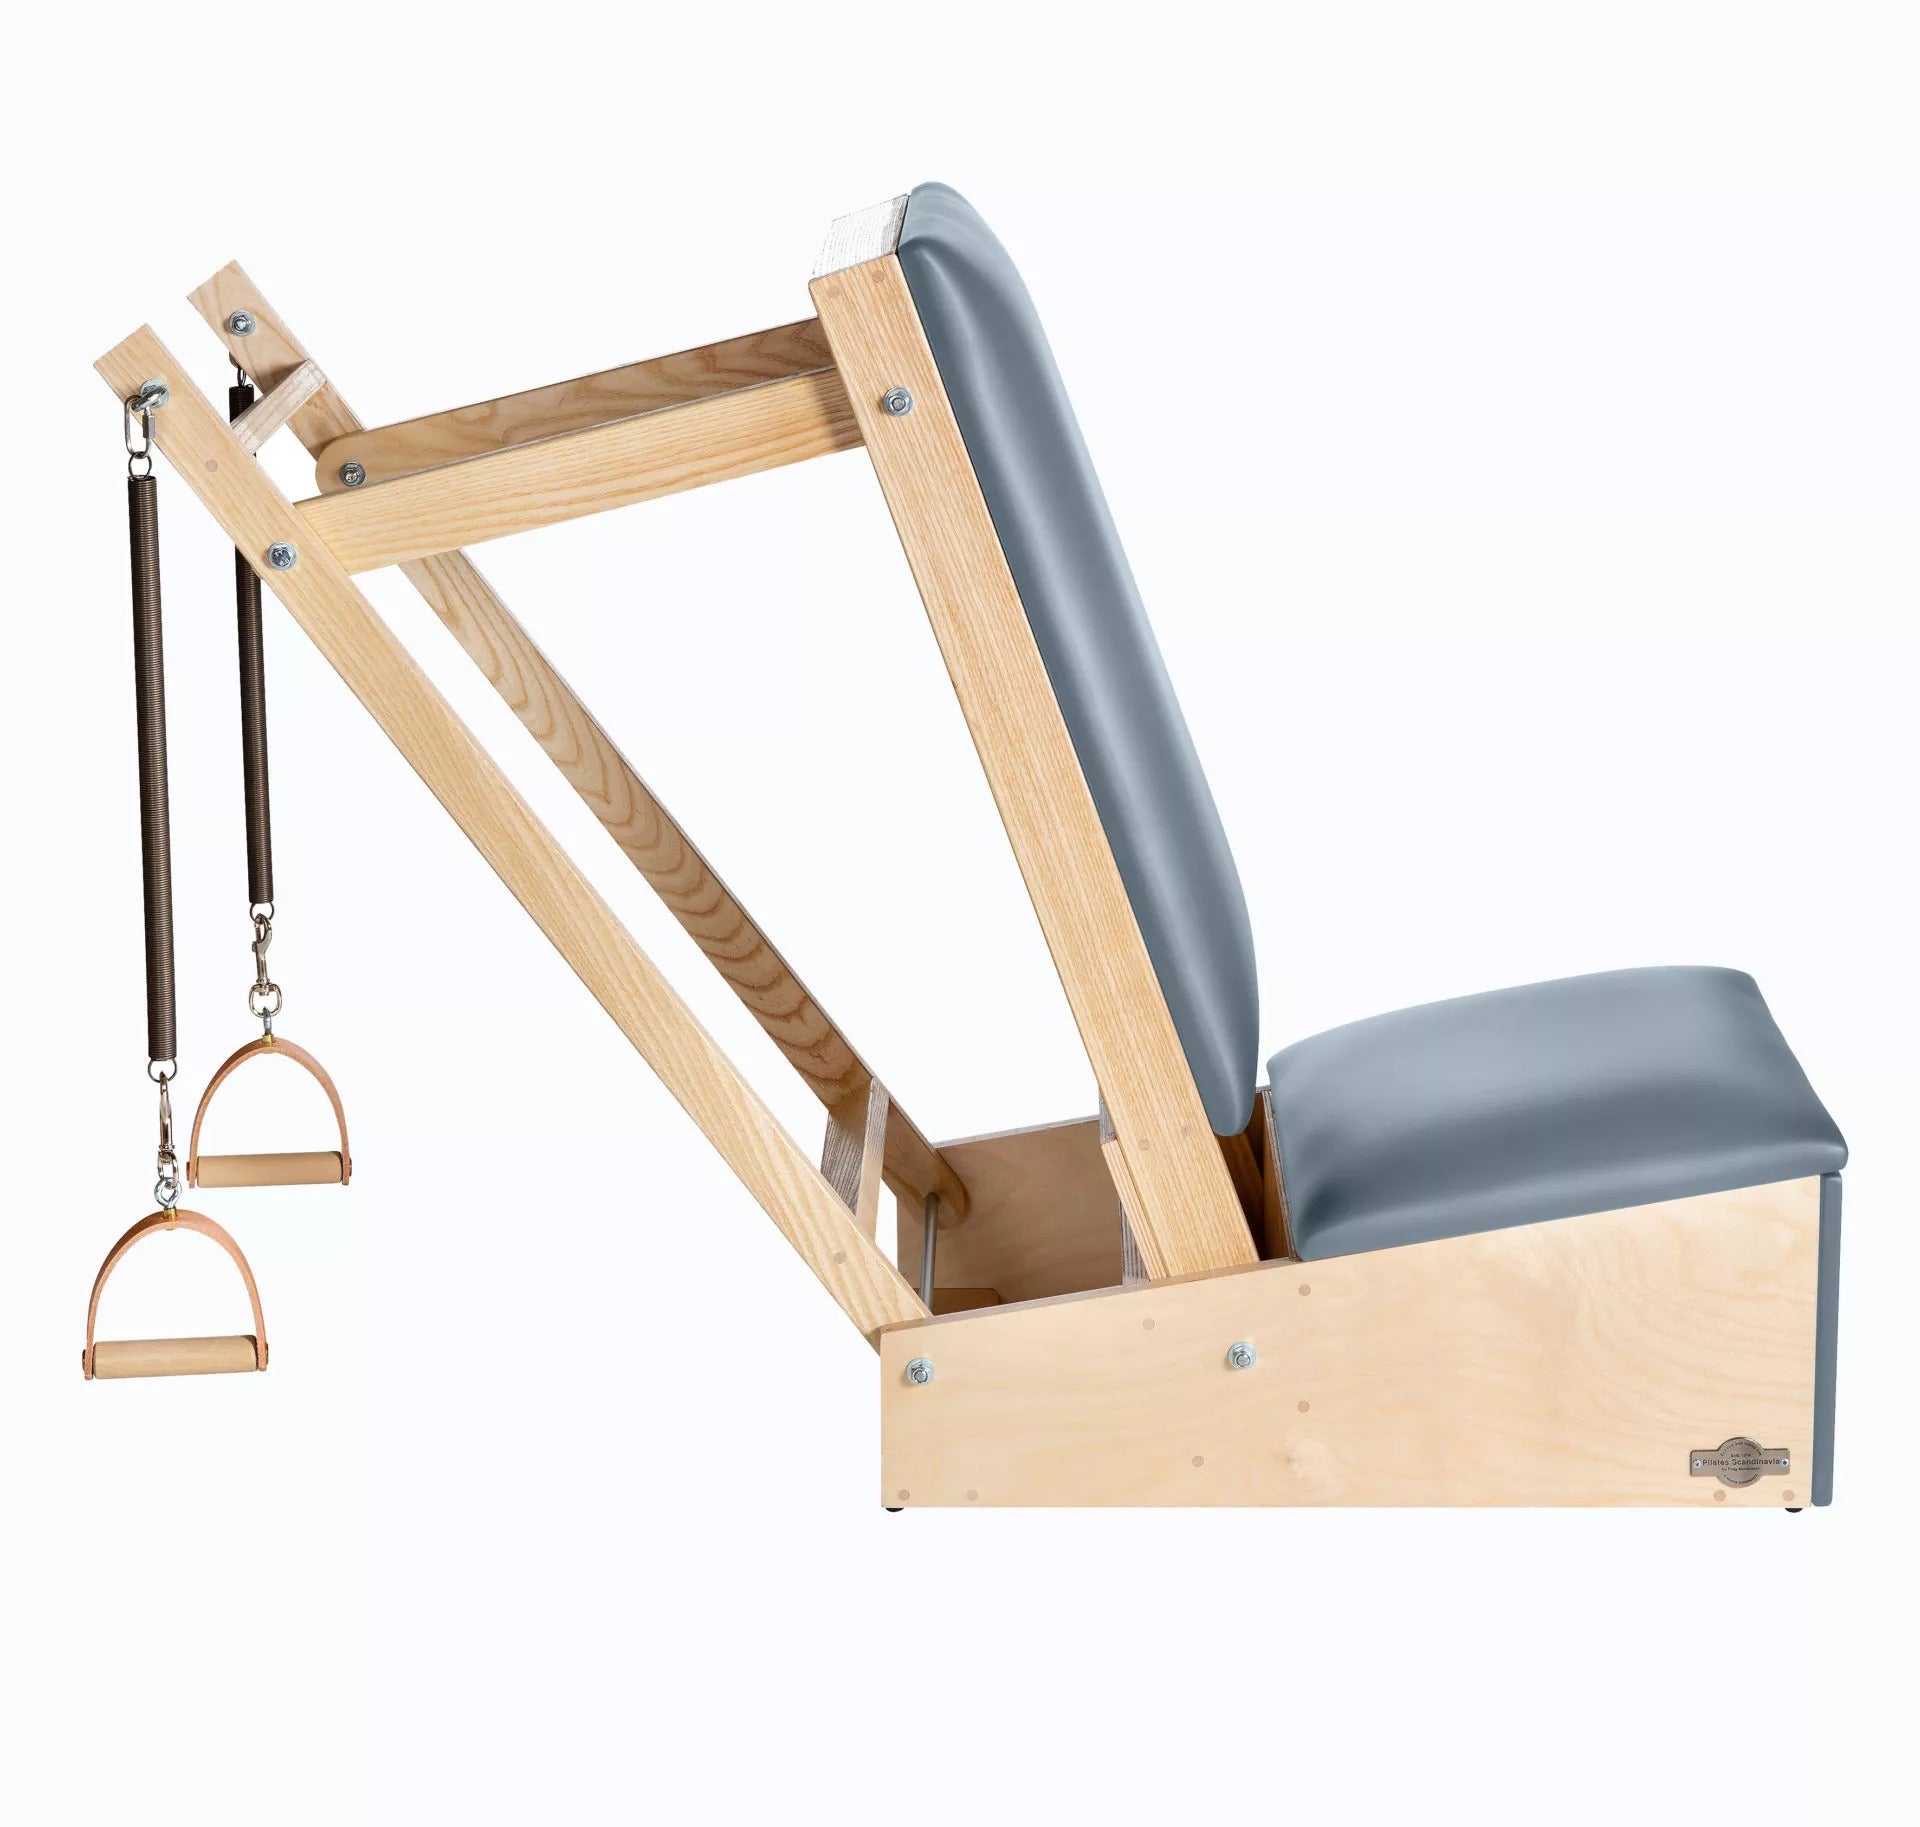 Pilates Exo Chair for sale【how much】at home-Cunruope®